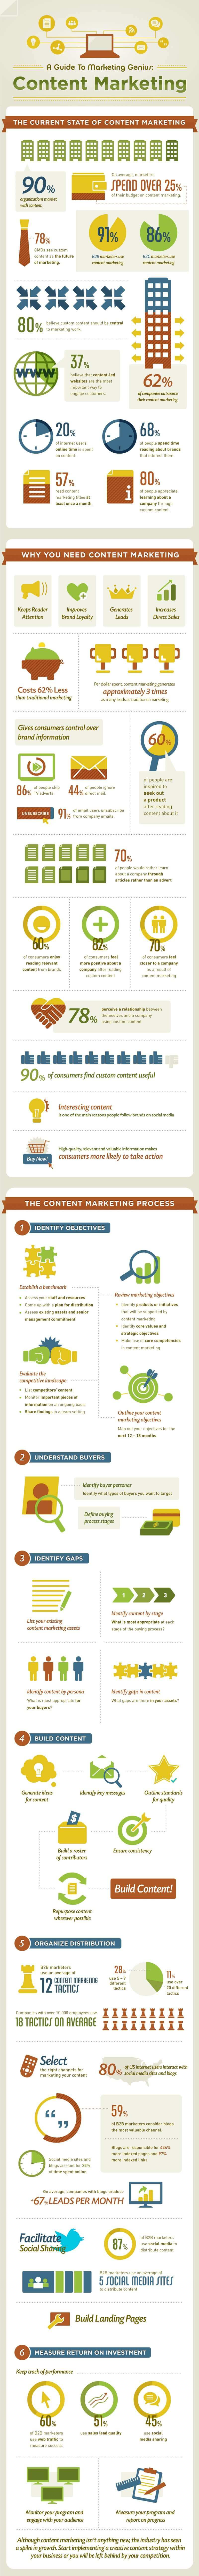 An infographic, showing different trends in content marketing.